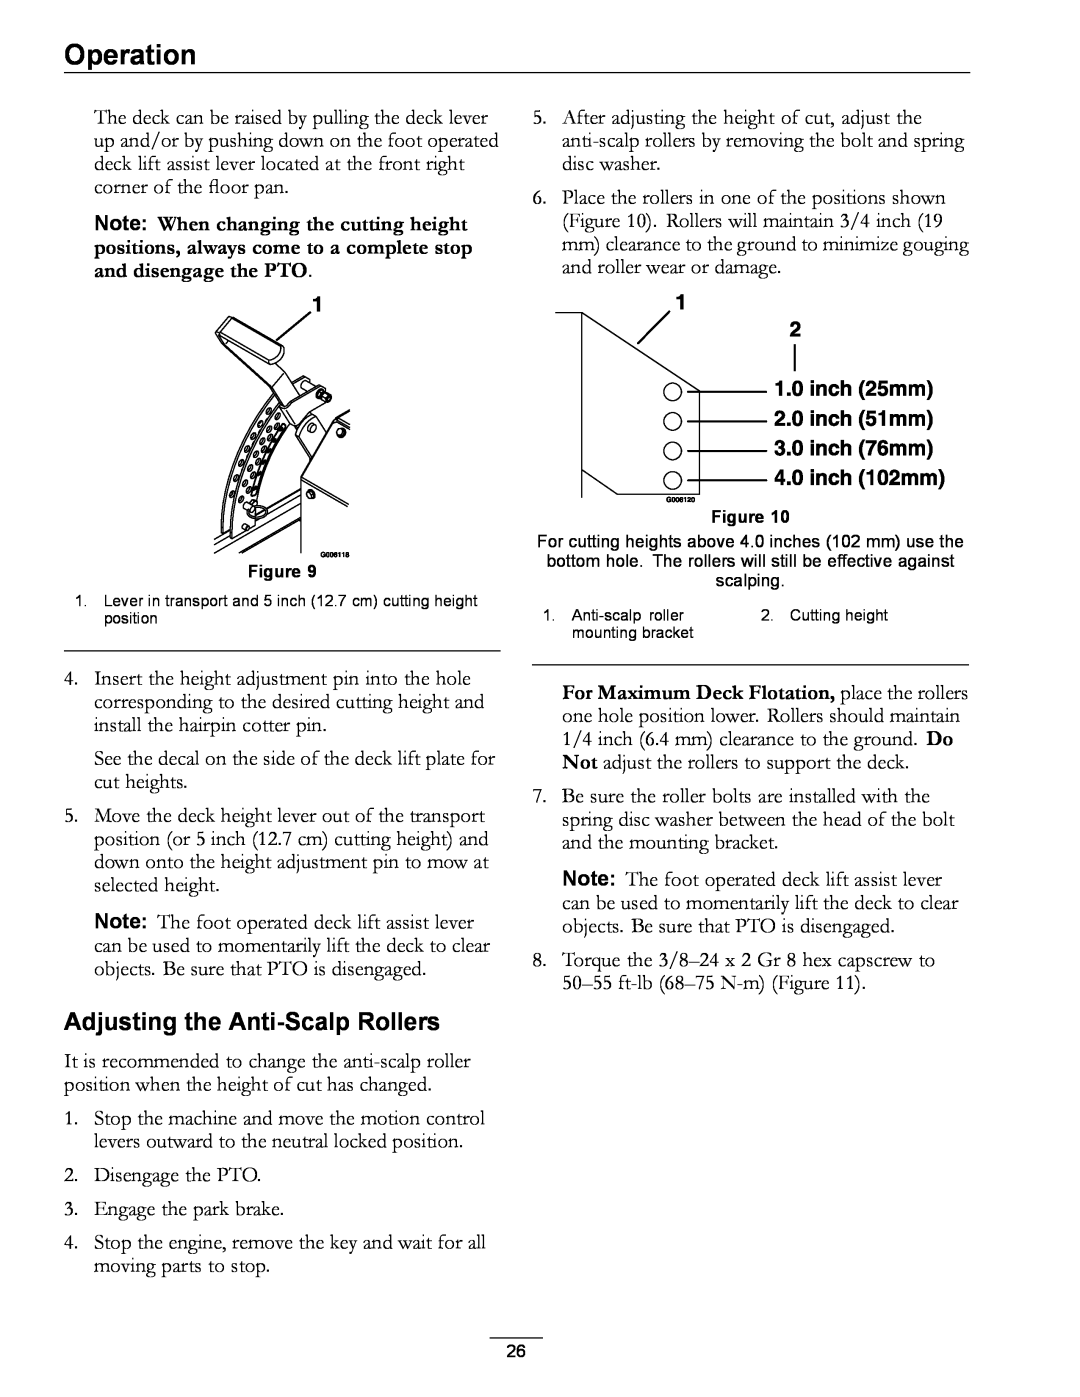 Exmark 920 manual Adjusting the Anti-Scalp Rollers, Operation 